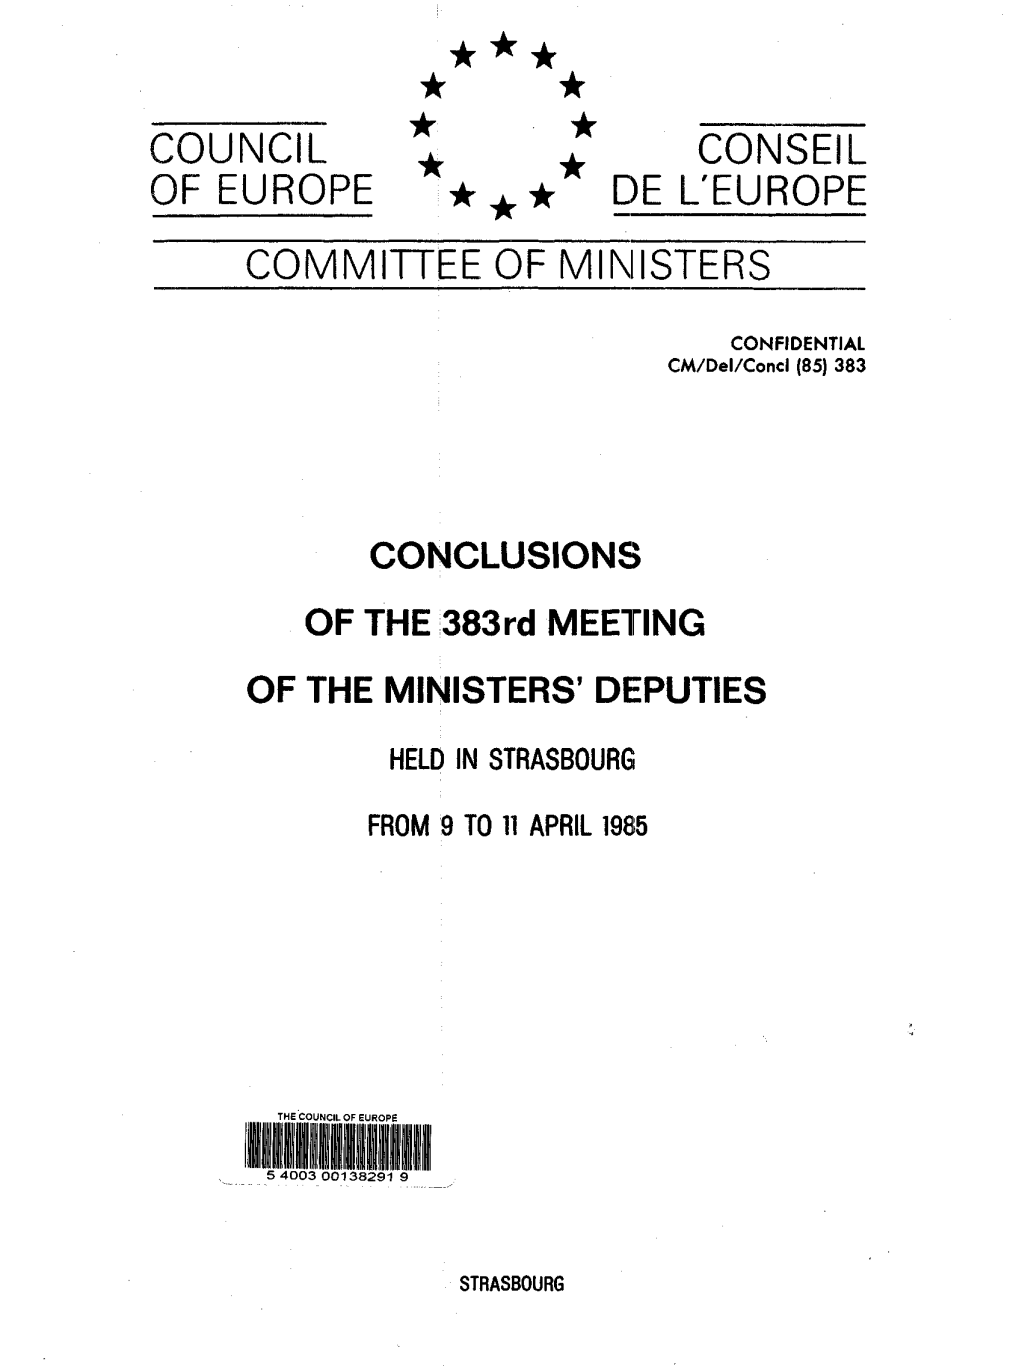 383 CONCLUSIONS of the 383Rd MEETING